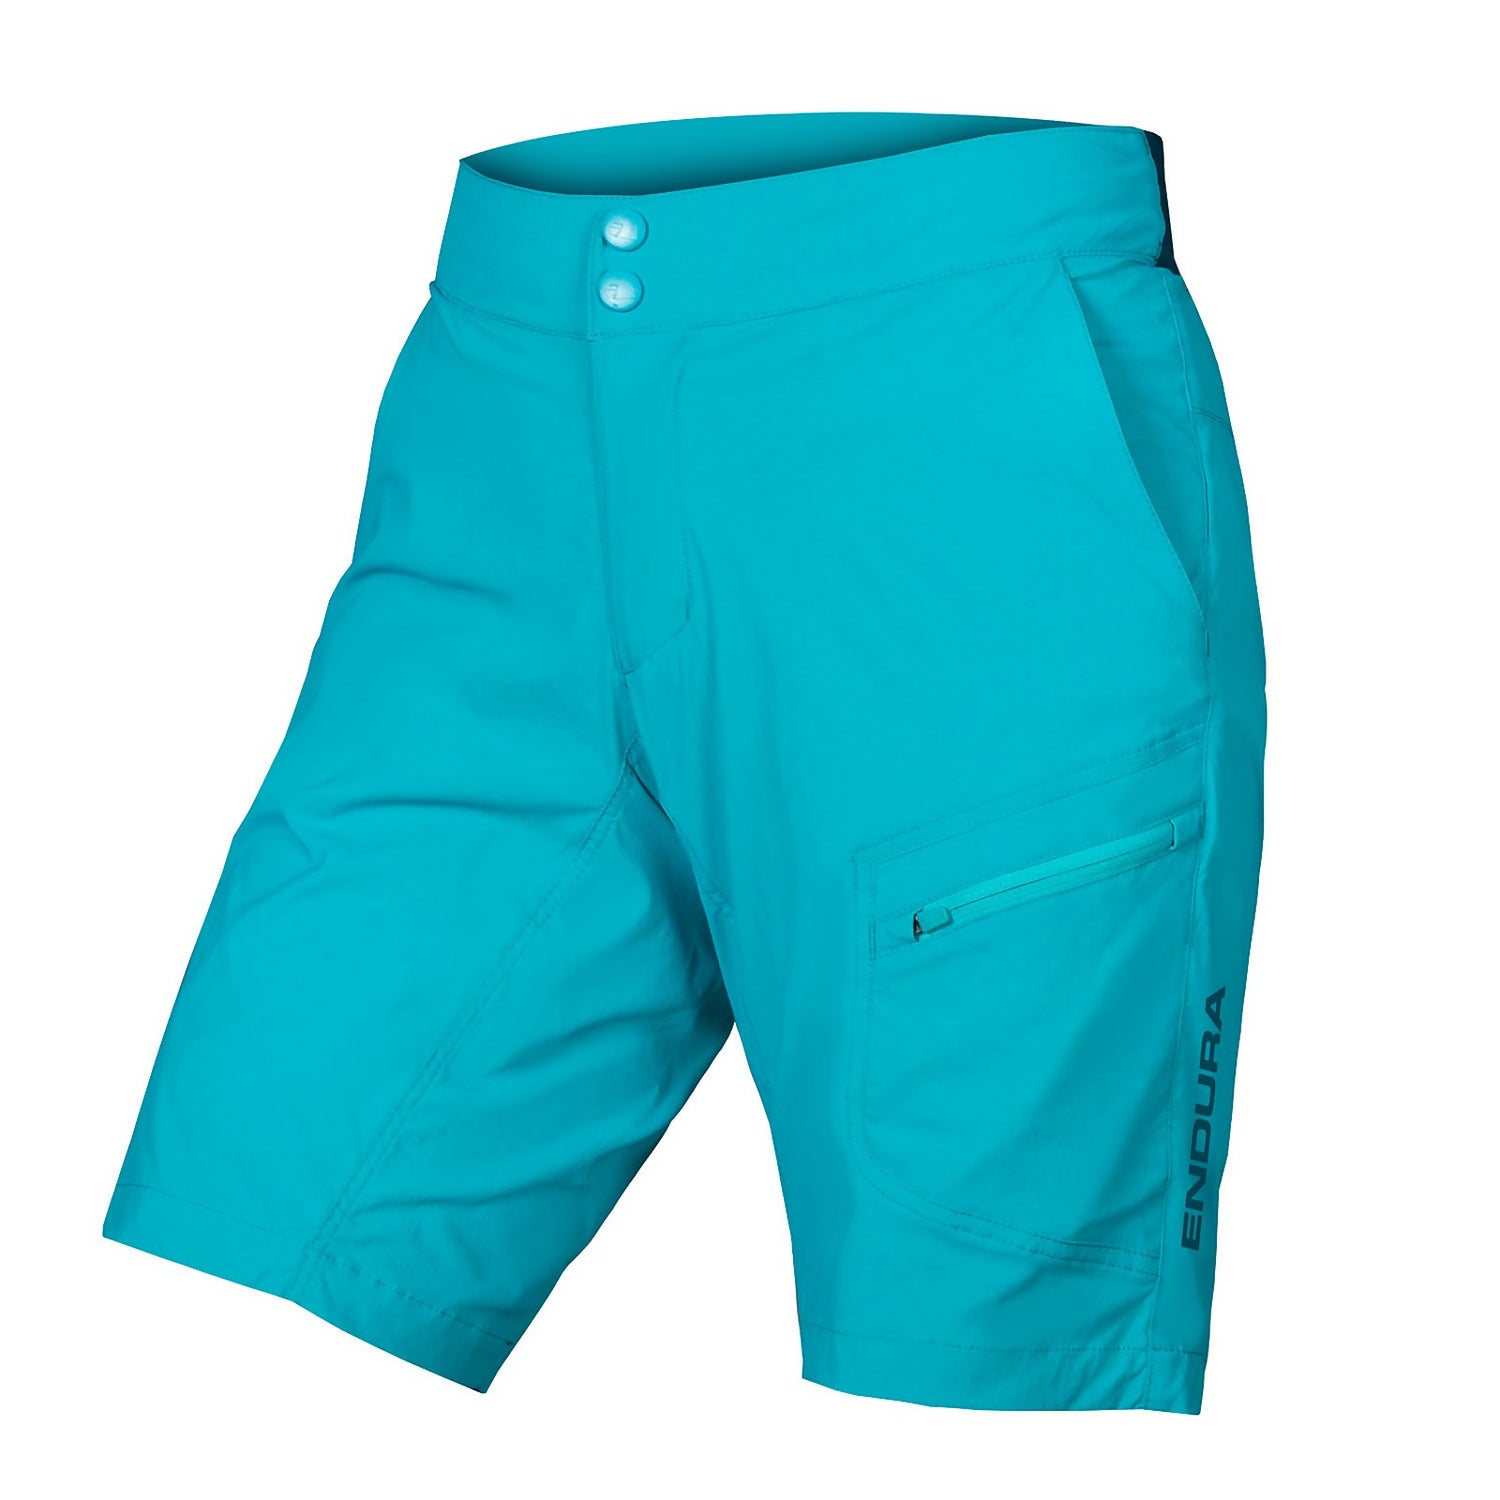 Women's Hummvee Lite Short with Liner - Pacific Blue - XL